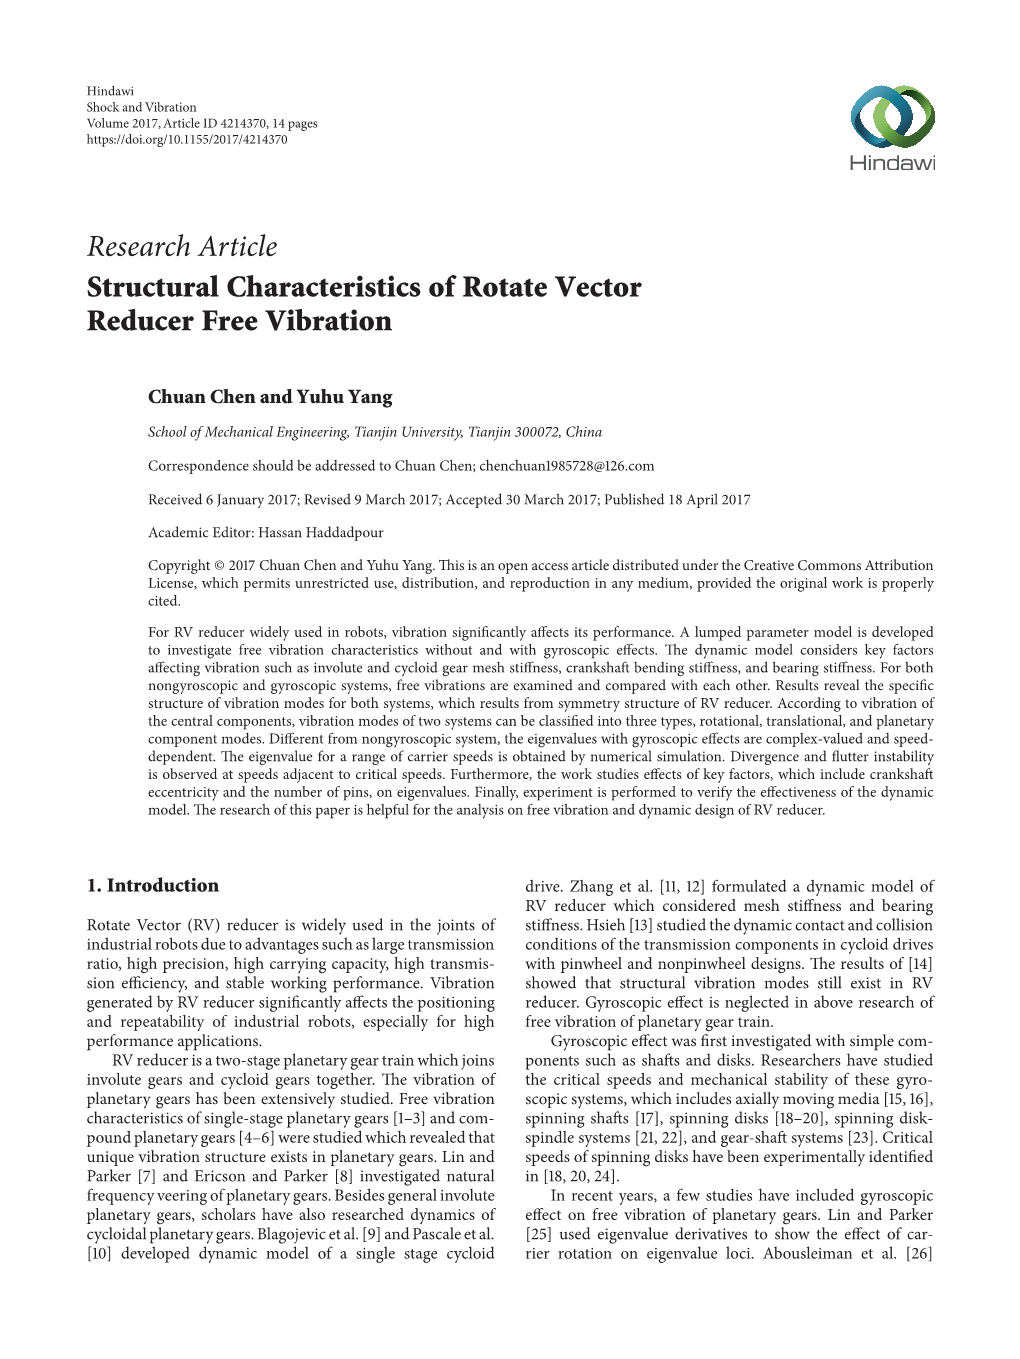 Research Article Structural Characteristics of Rotate Vector Reducer Free Vibration